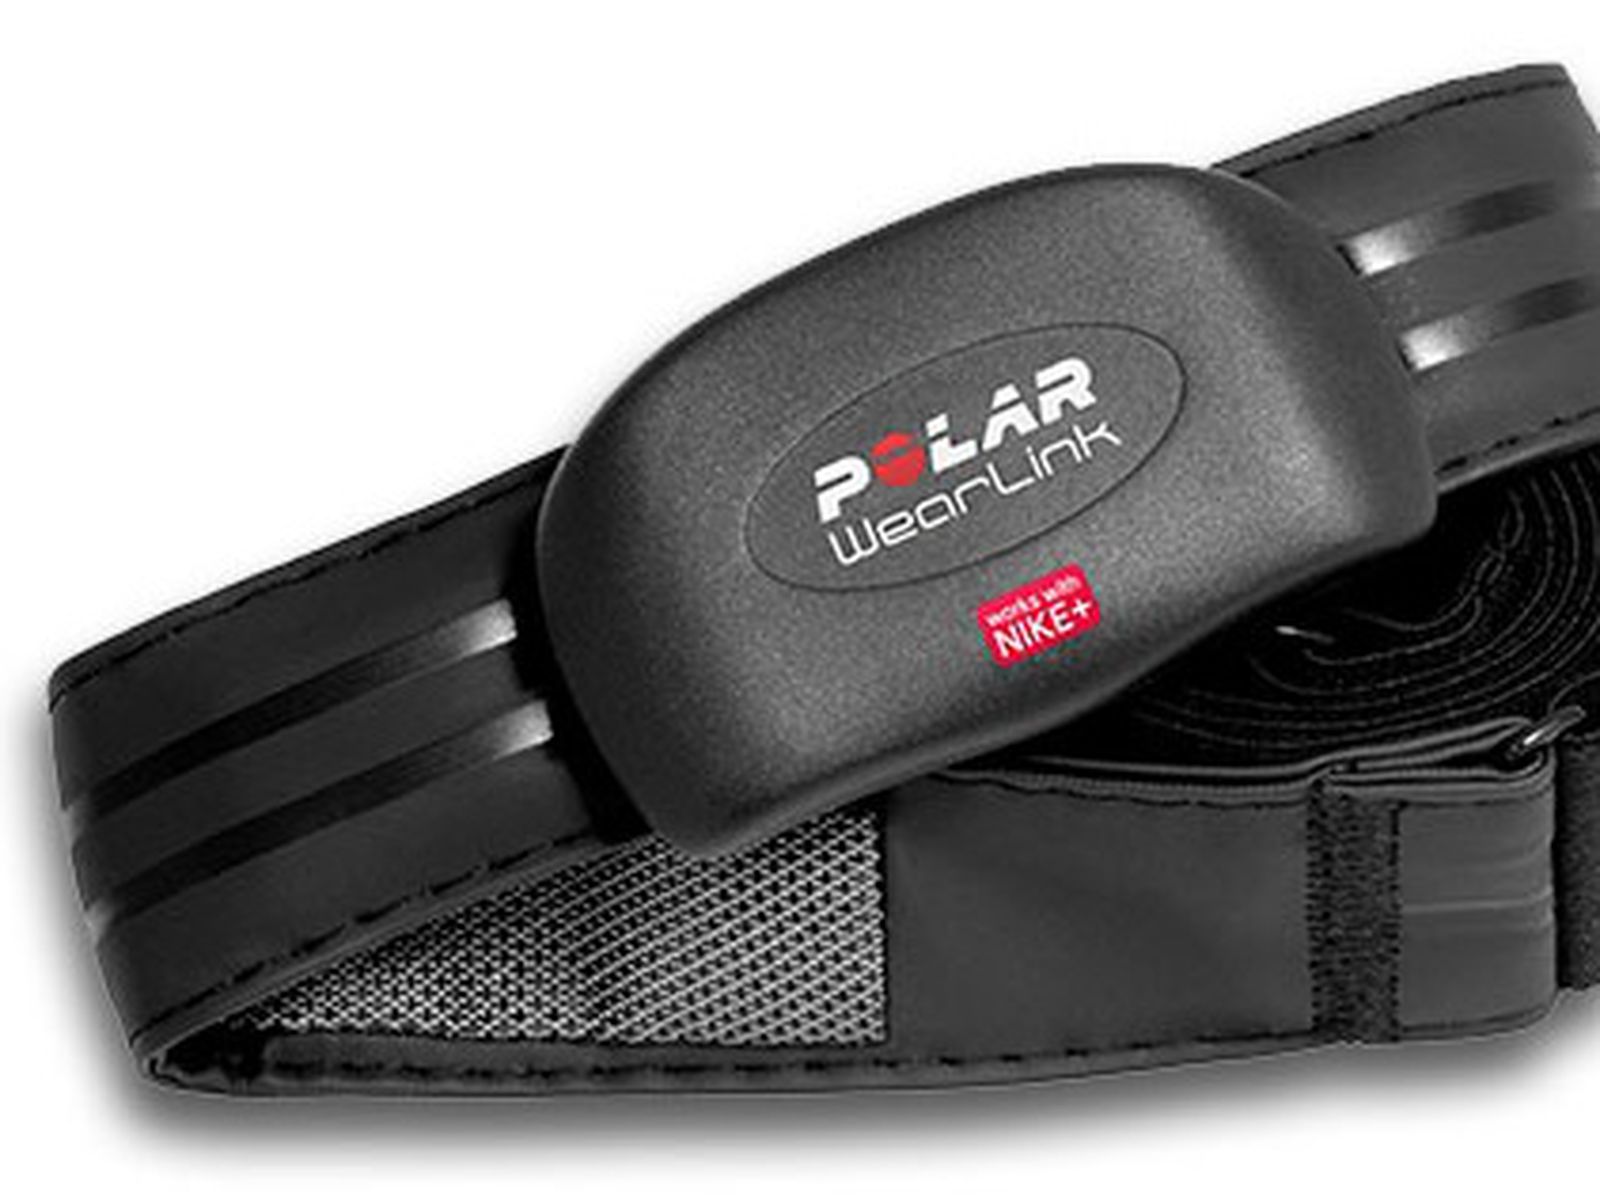 Estable El cielo dulce Polar and Nike Announce Wearlink Heart Rate Monitor for Nike+ - MacRumors